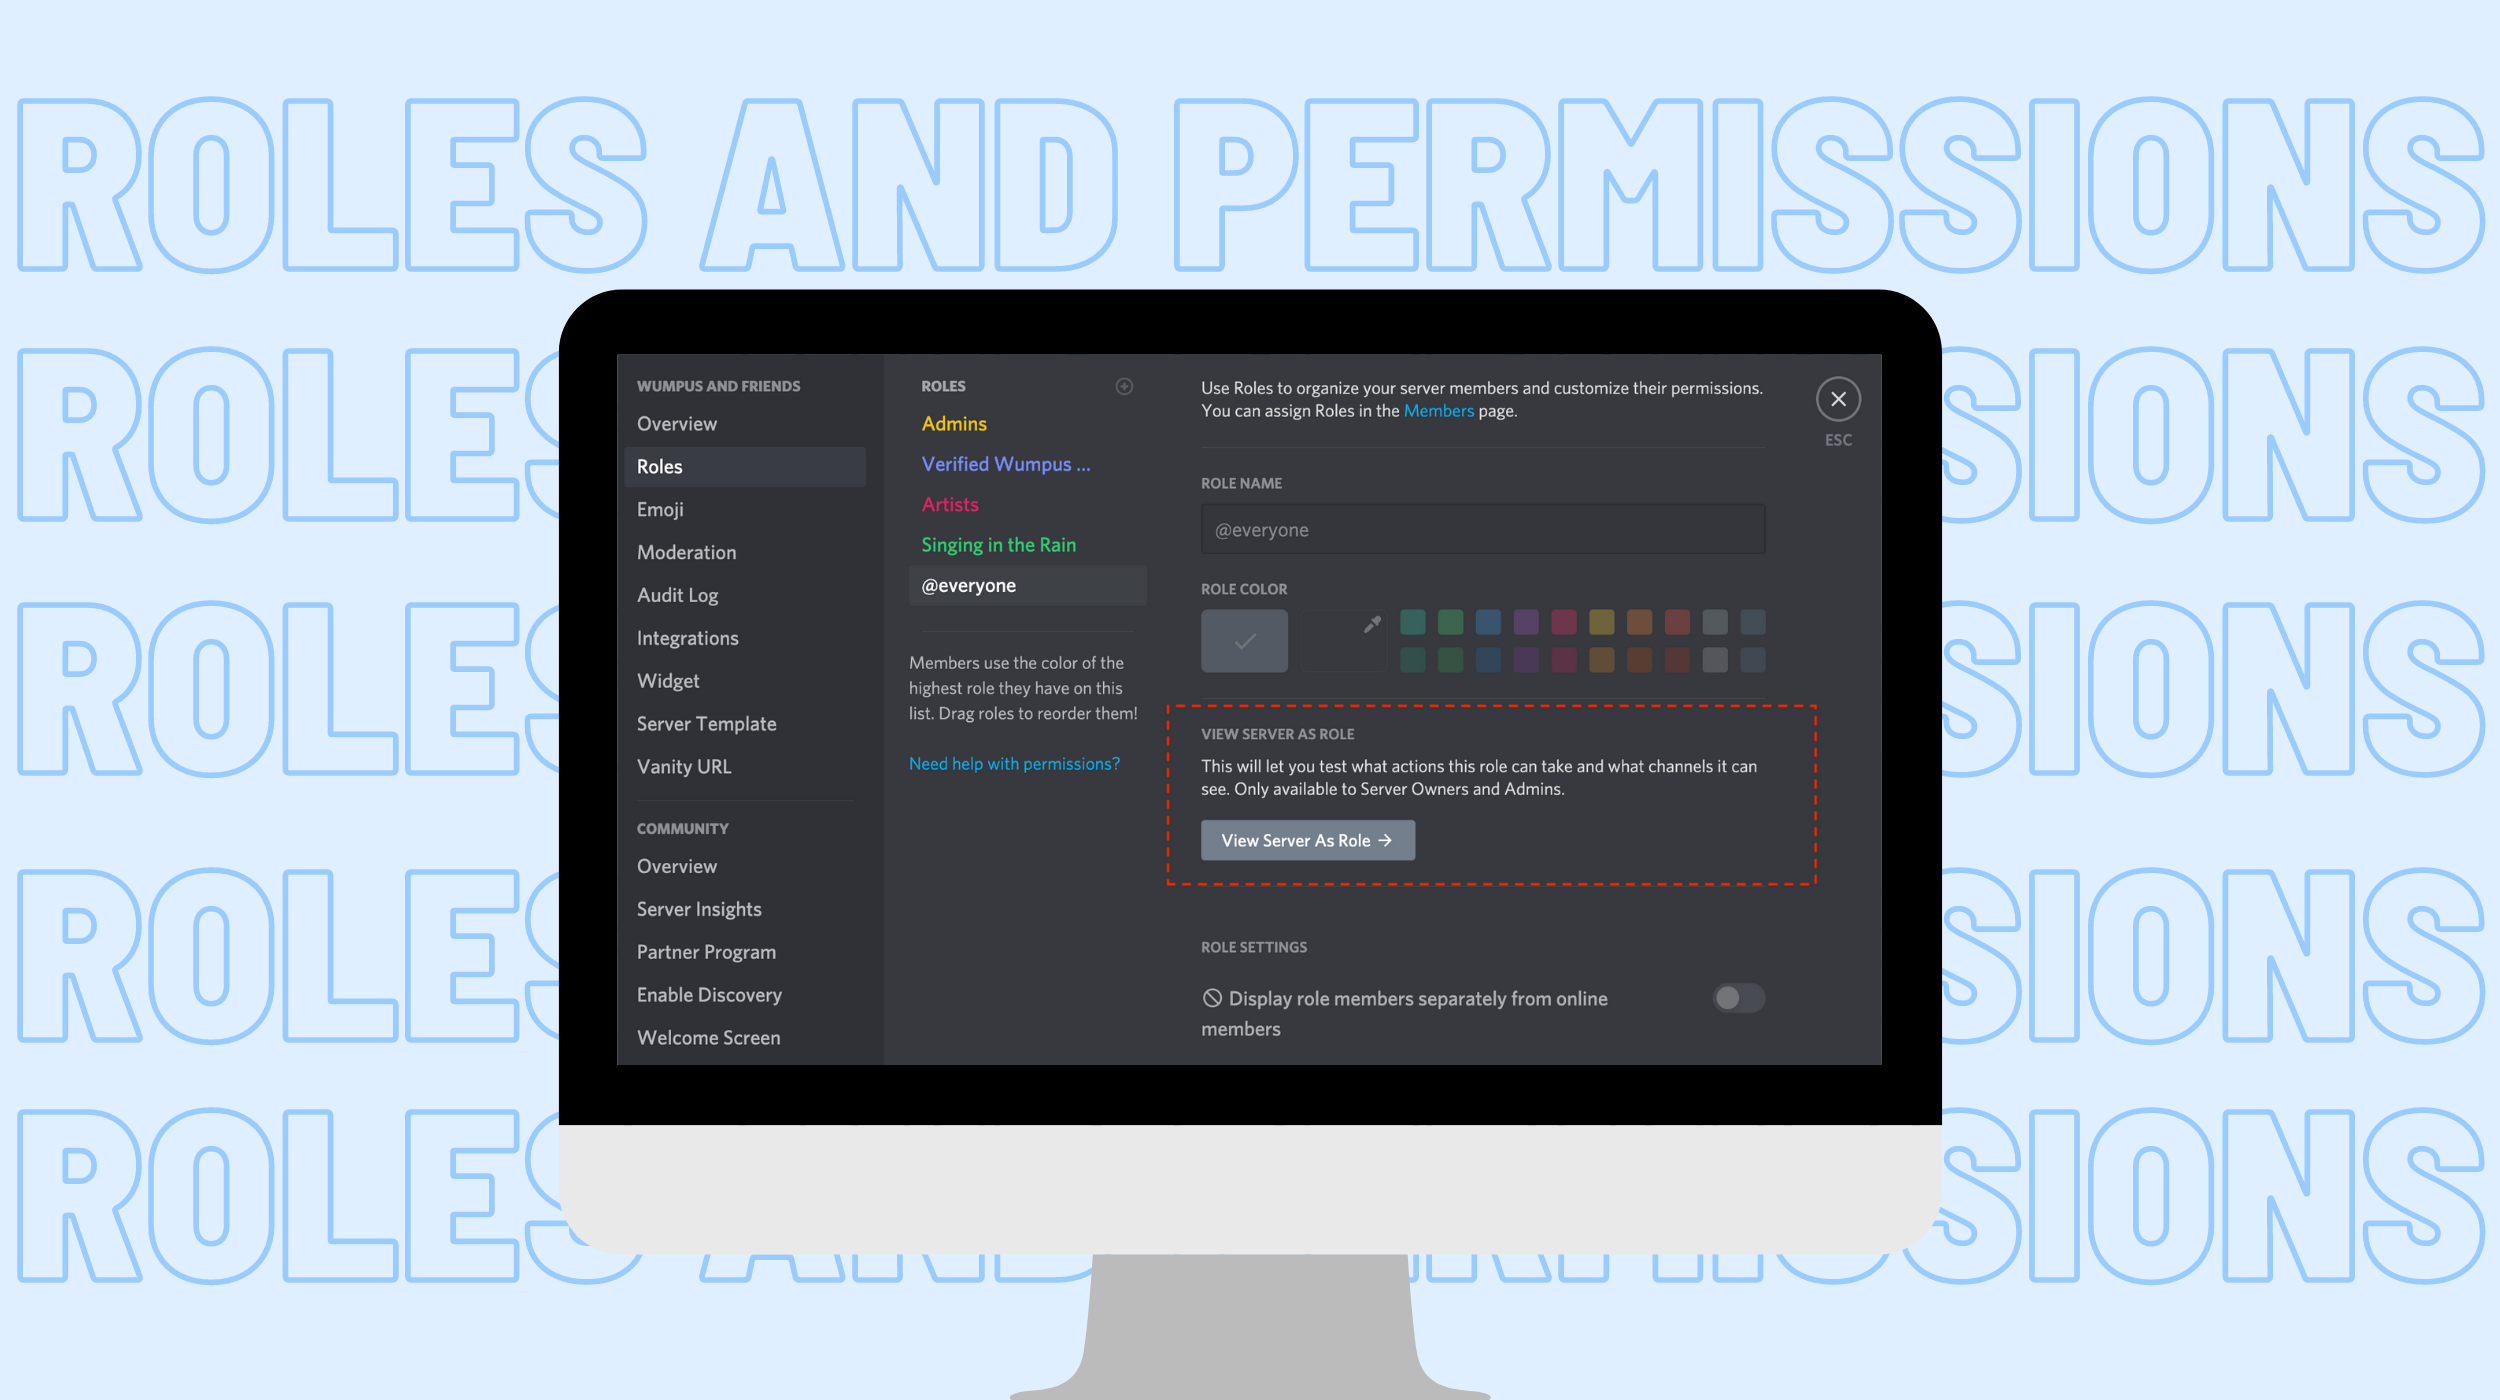 Roles and permissions